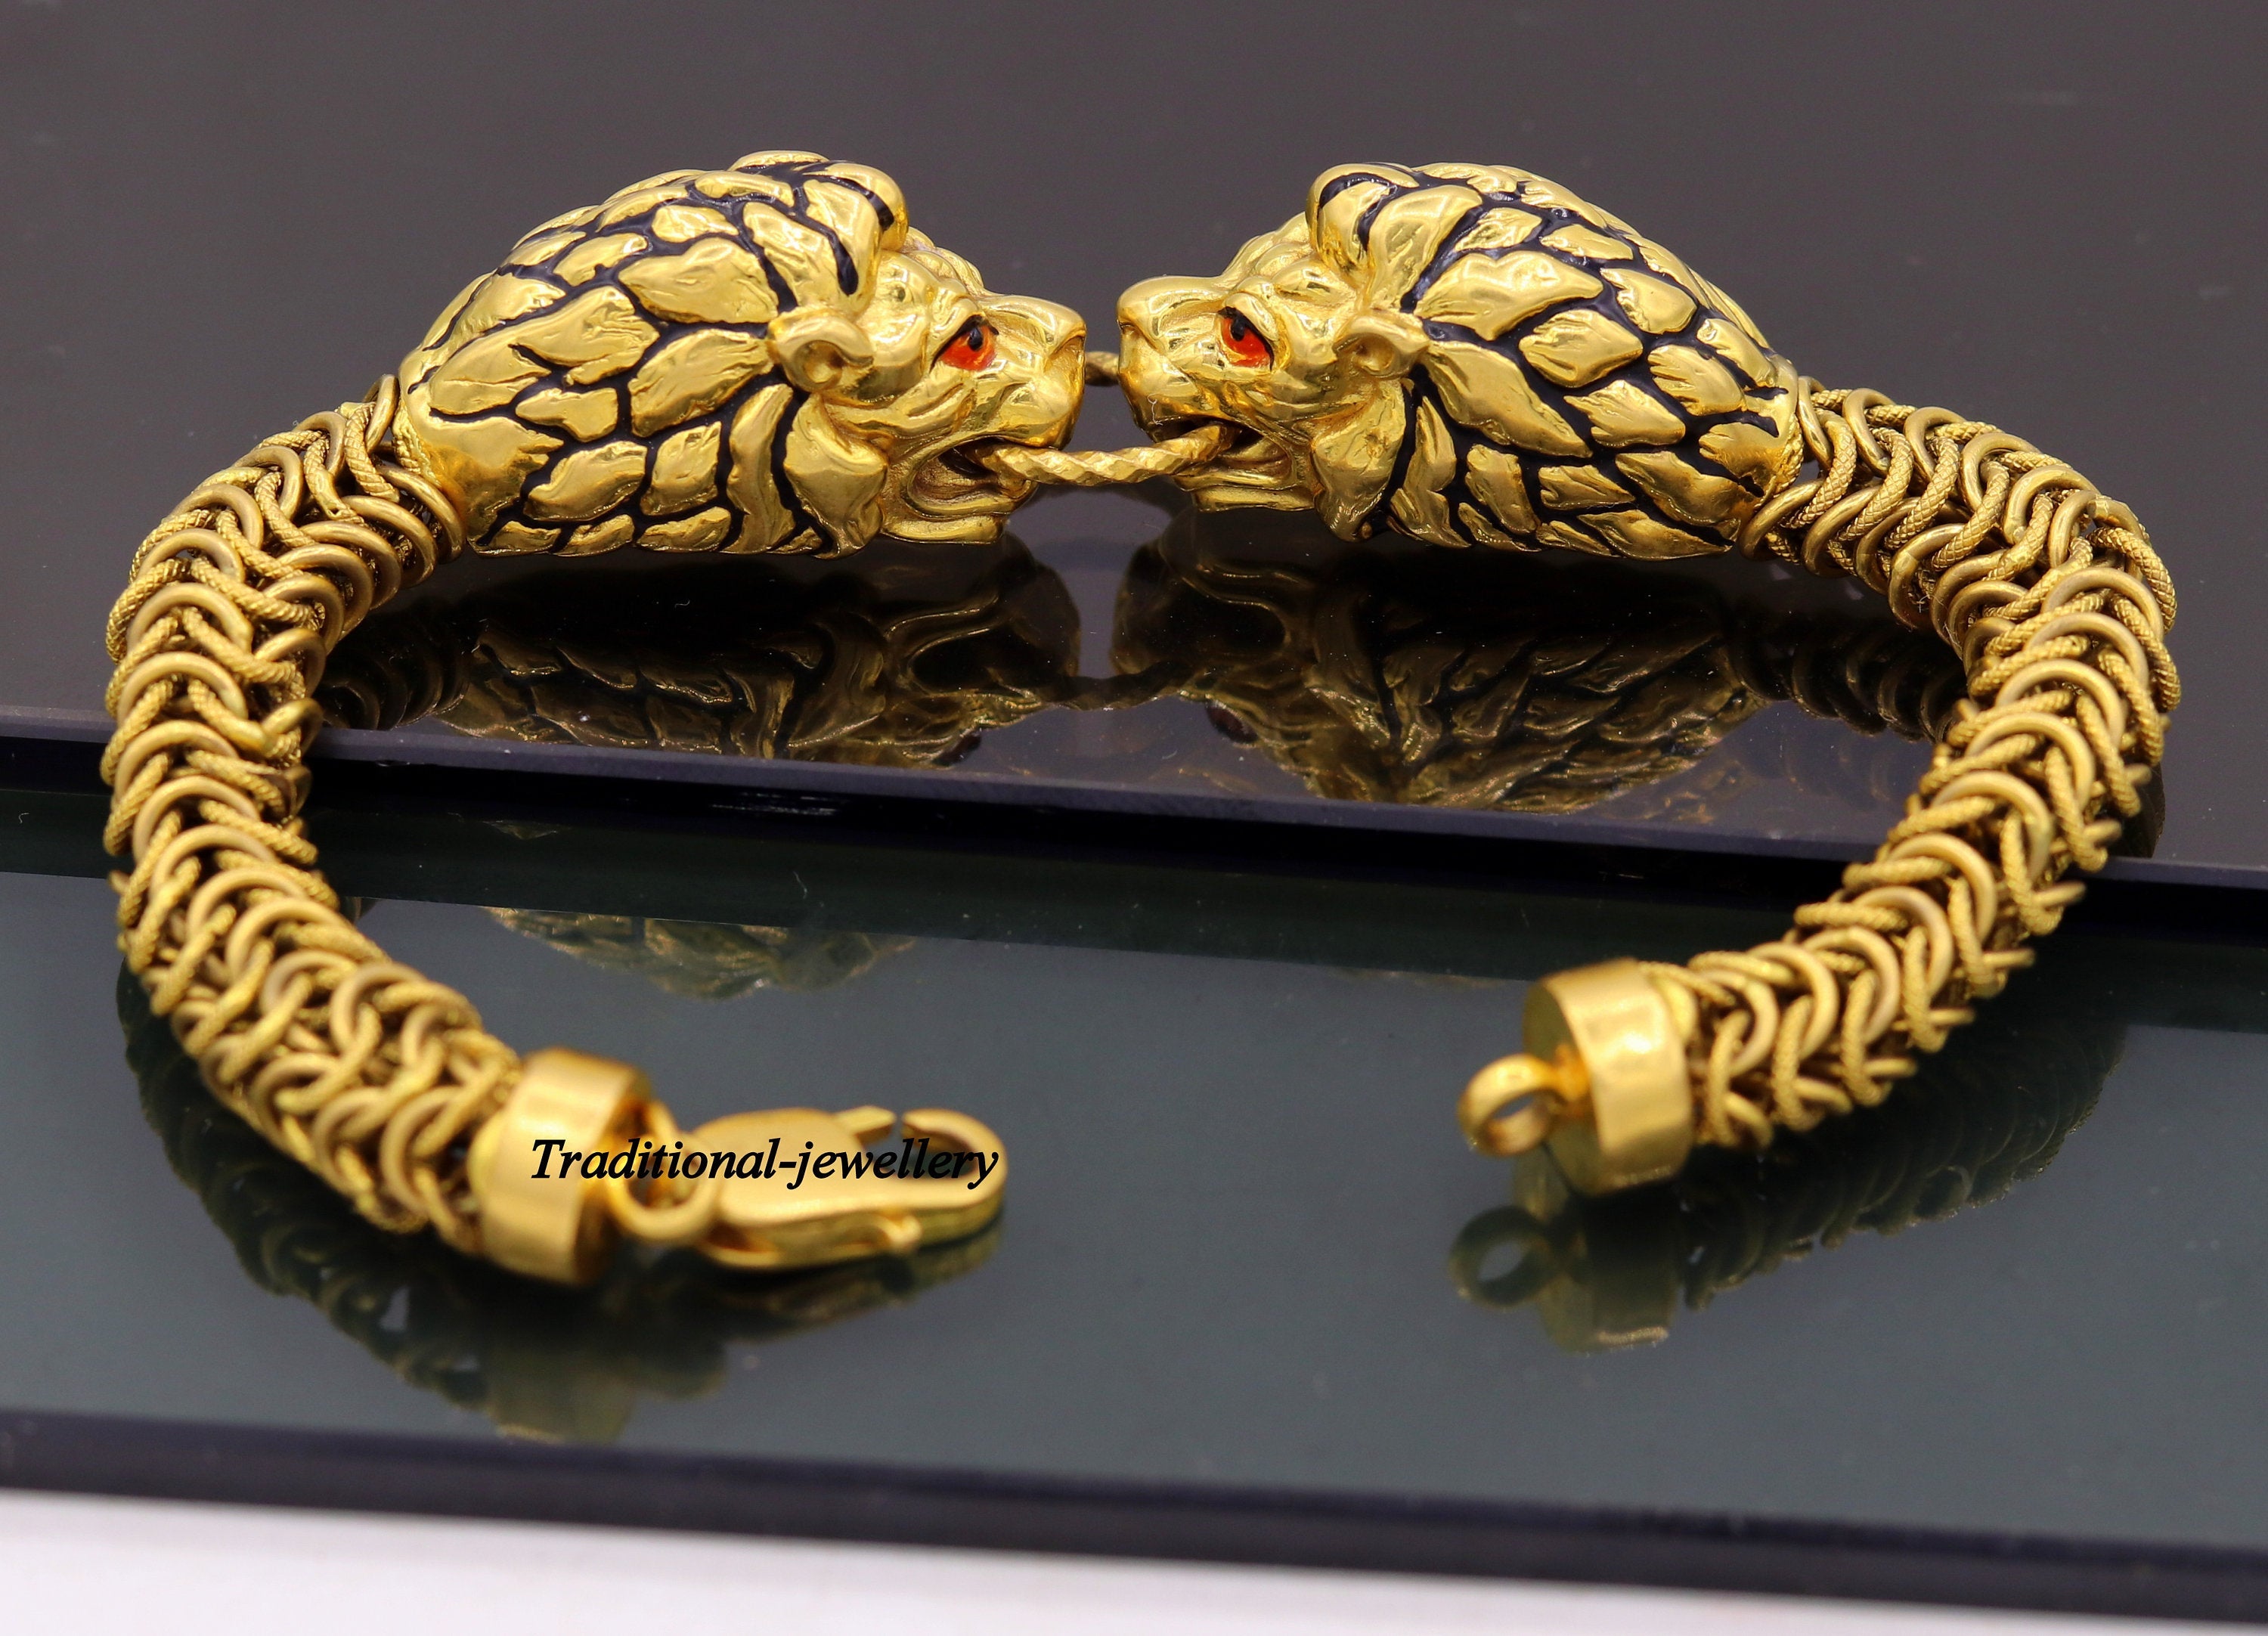 Vintage antique stylish handmade lion bracelet in solid hallmarked 22kt  yellow gold mens bracelet lion face daily use jewelry  TRIBAL ORNAMENTS